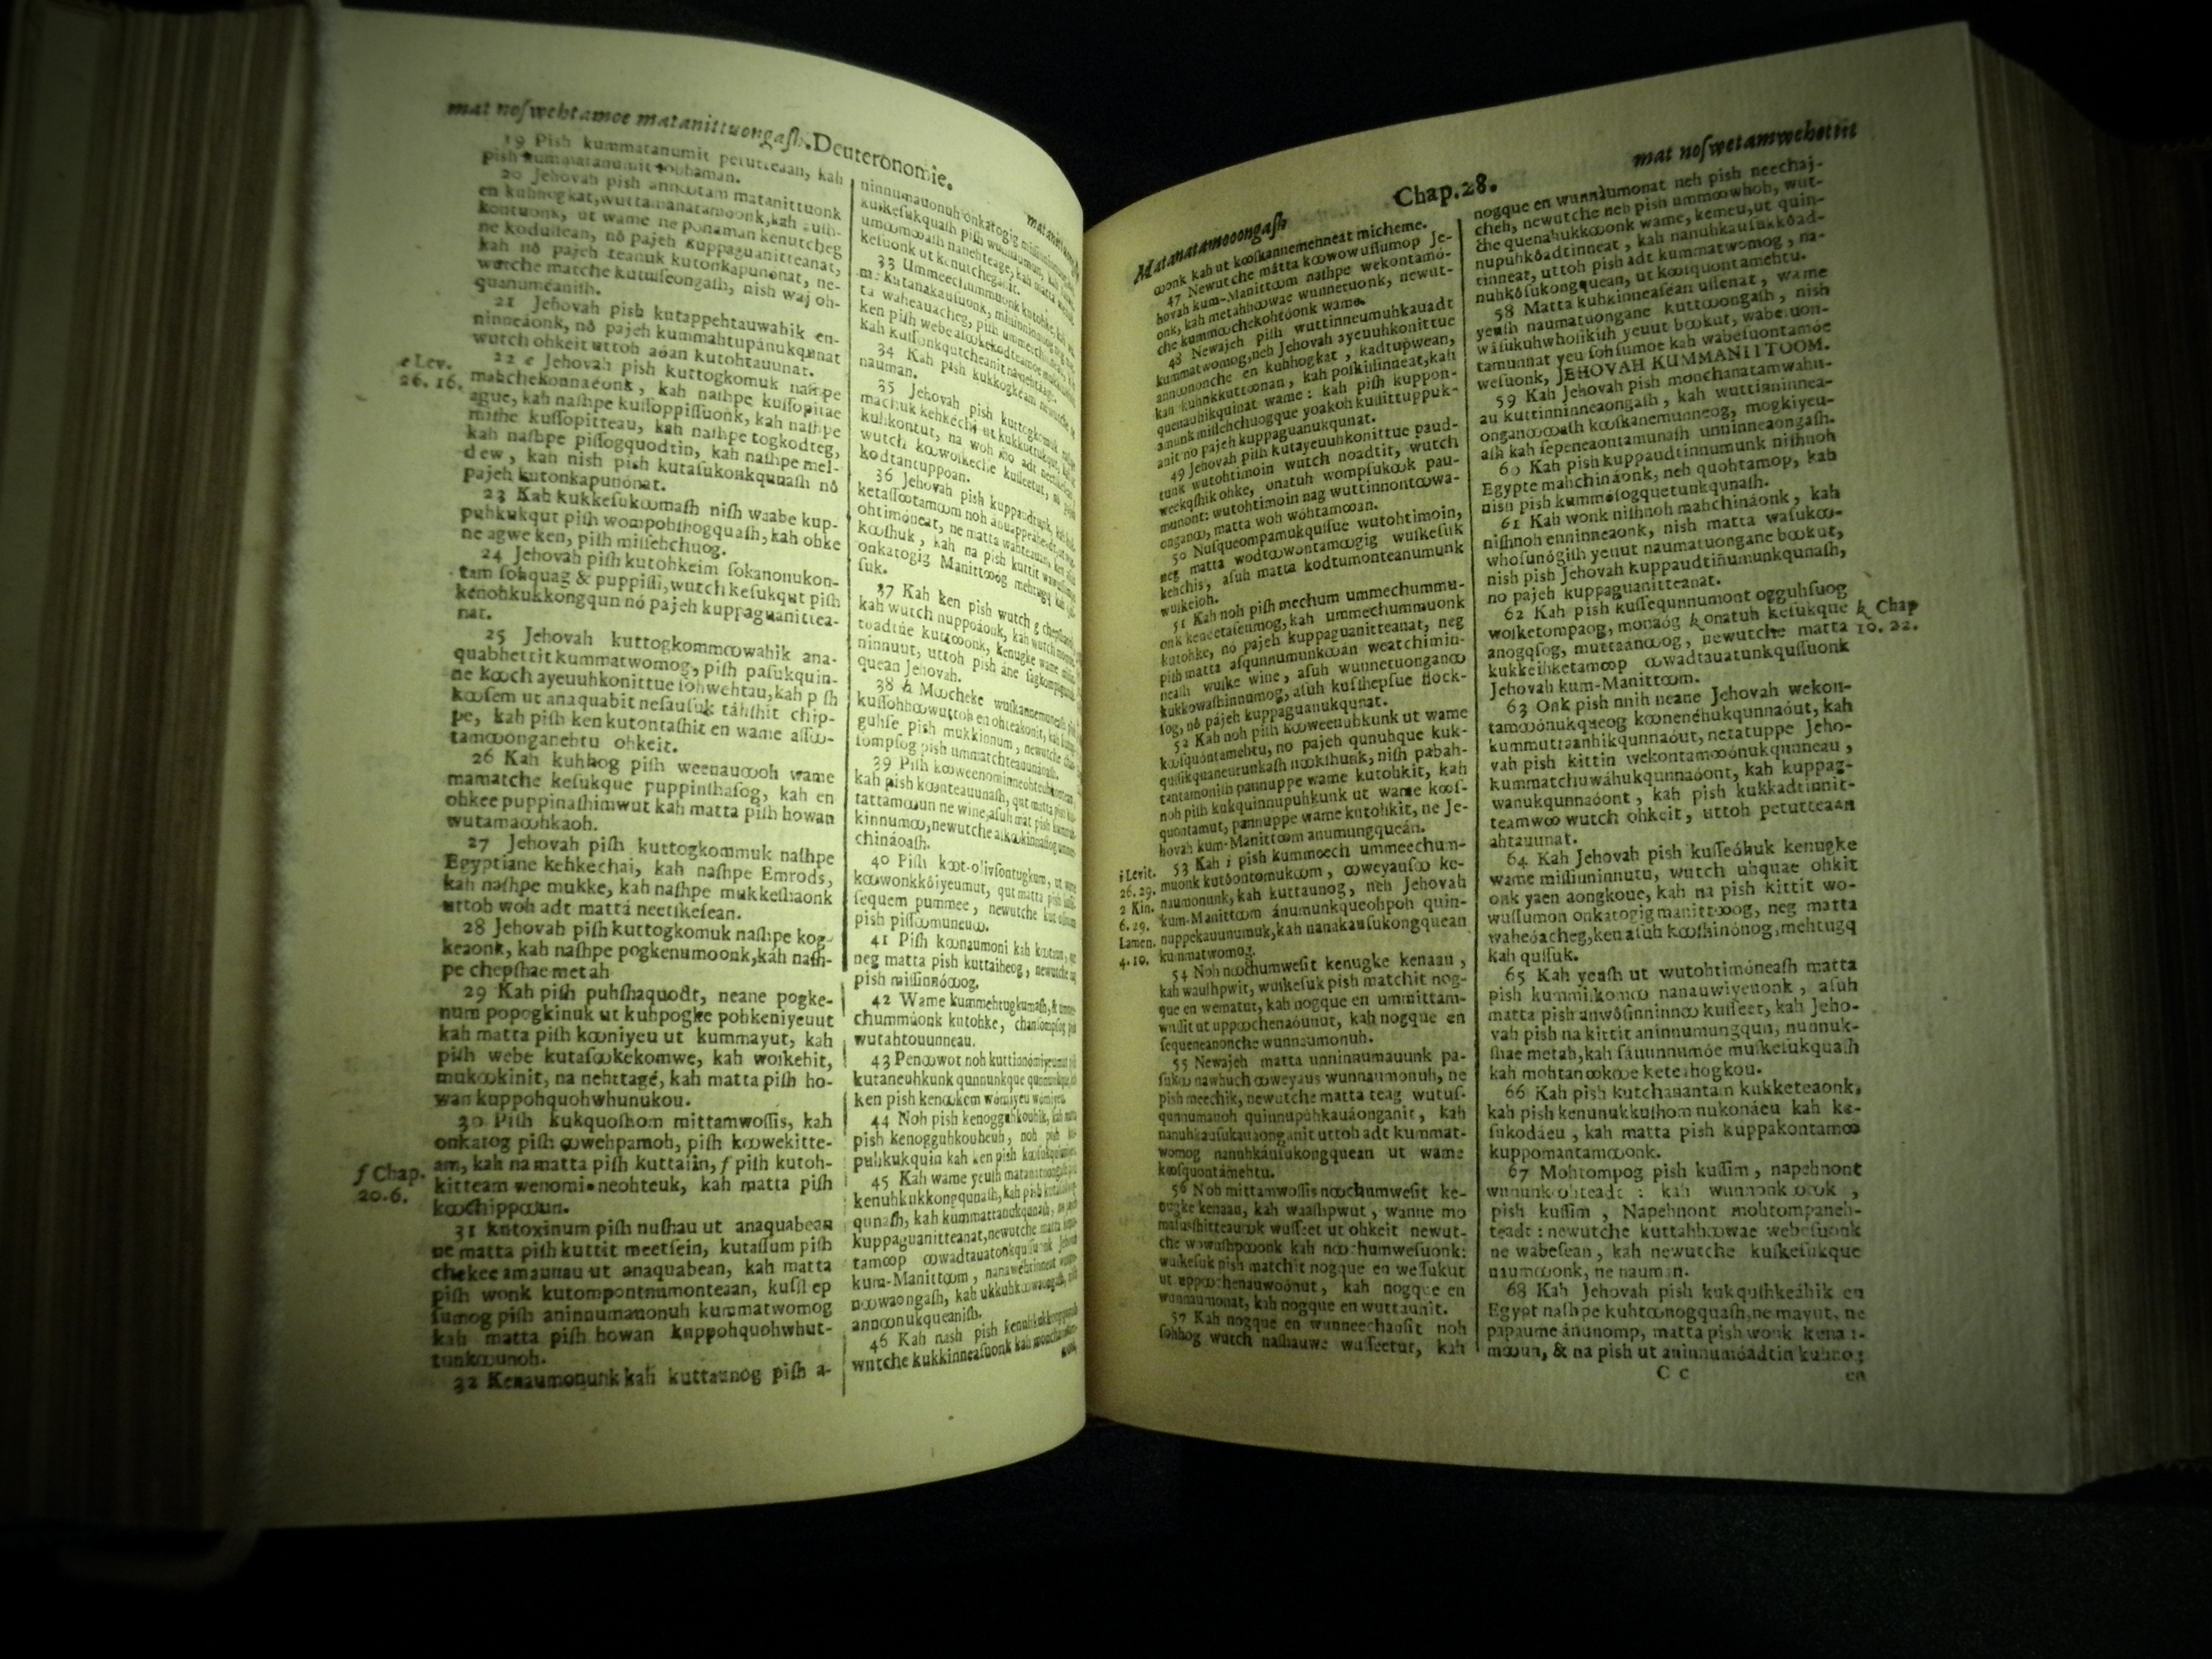 First edition of the Eliot Bible opened to the book of Deuteronomy. (A 1663 .B53. Tracy W. McGregor Library of American History. Photograph by Donna Stapley)